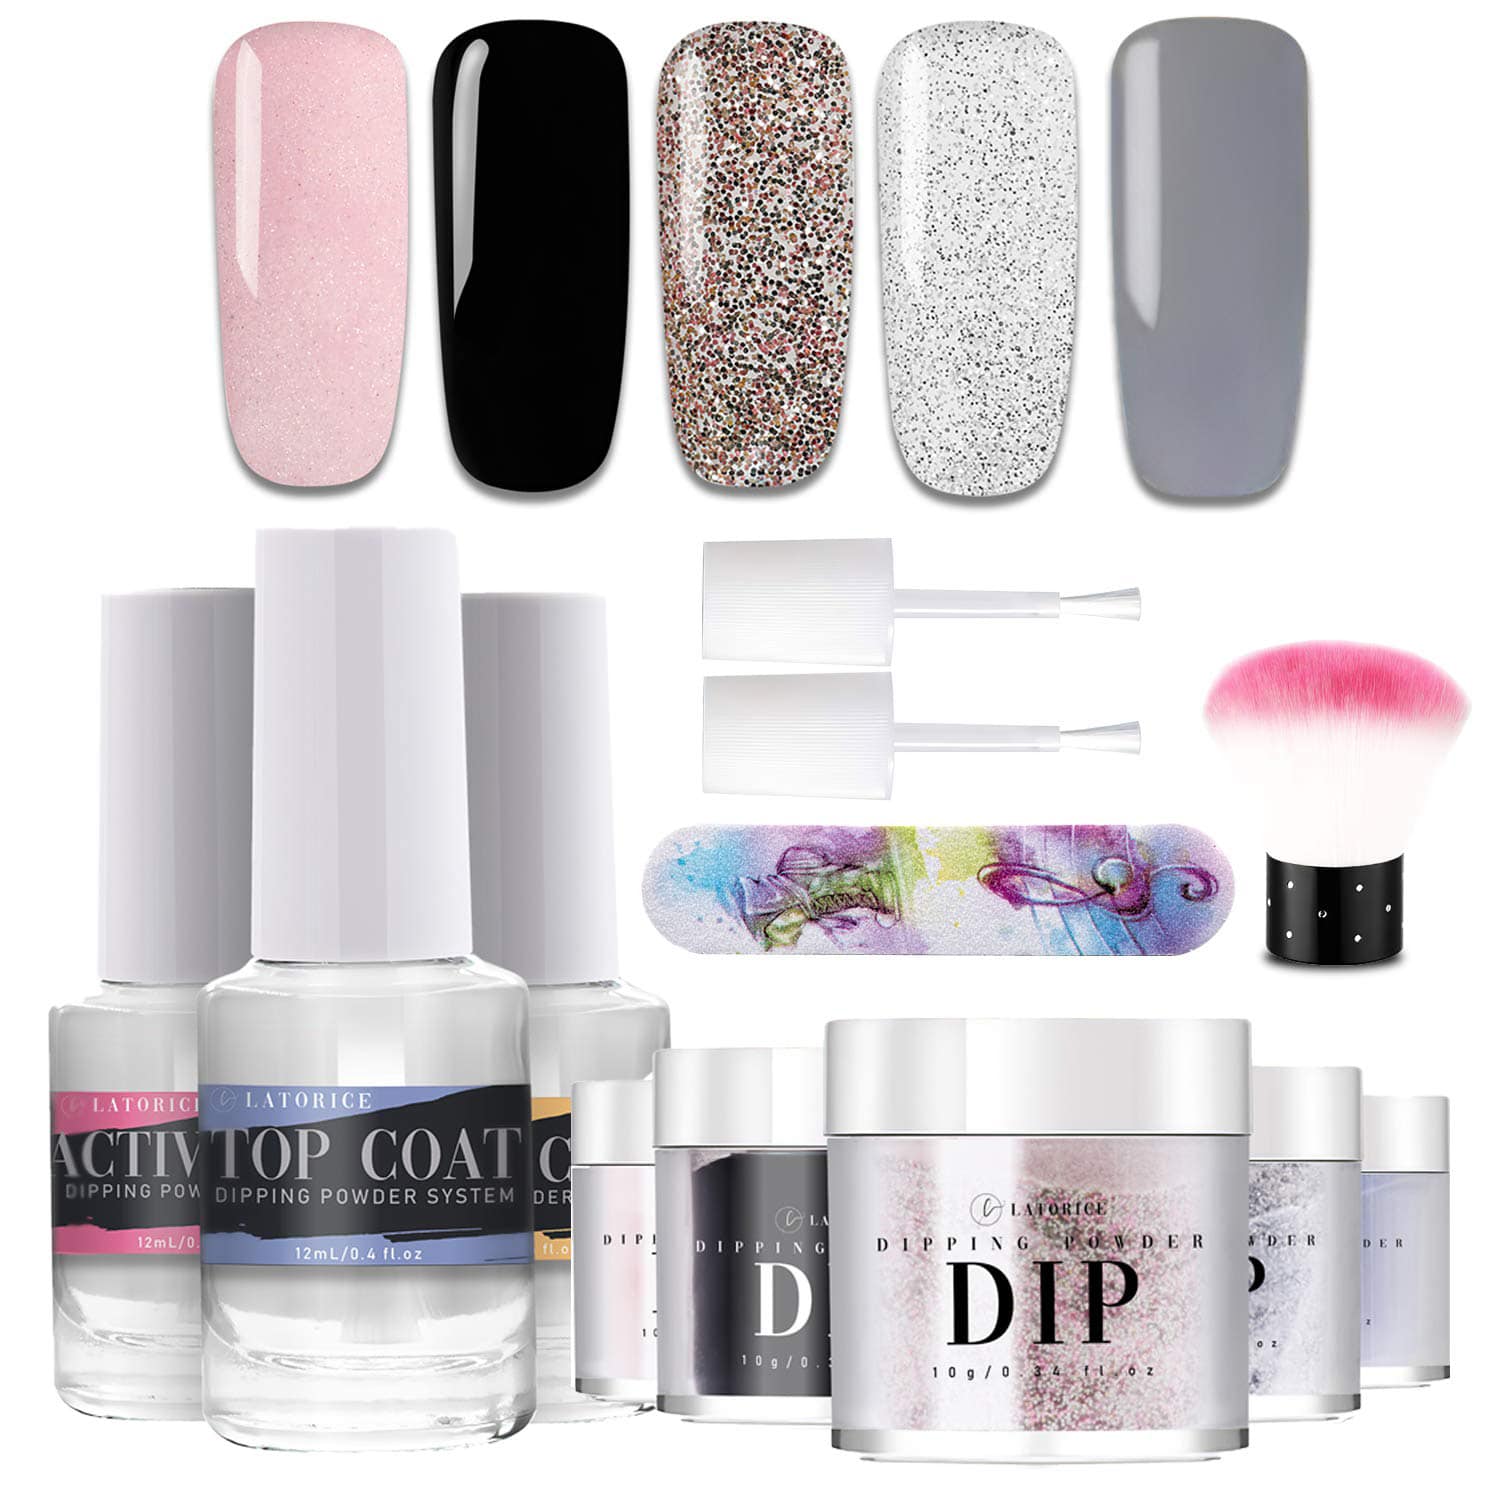 Top 10 Best Quality Professional Nail Art Set Kits in 2021 Reviews | Guide